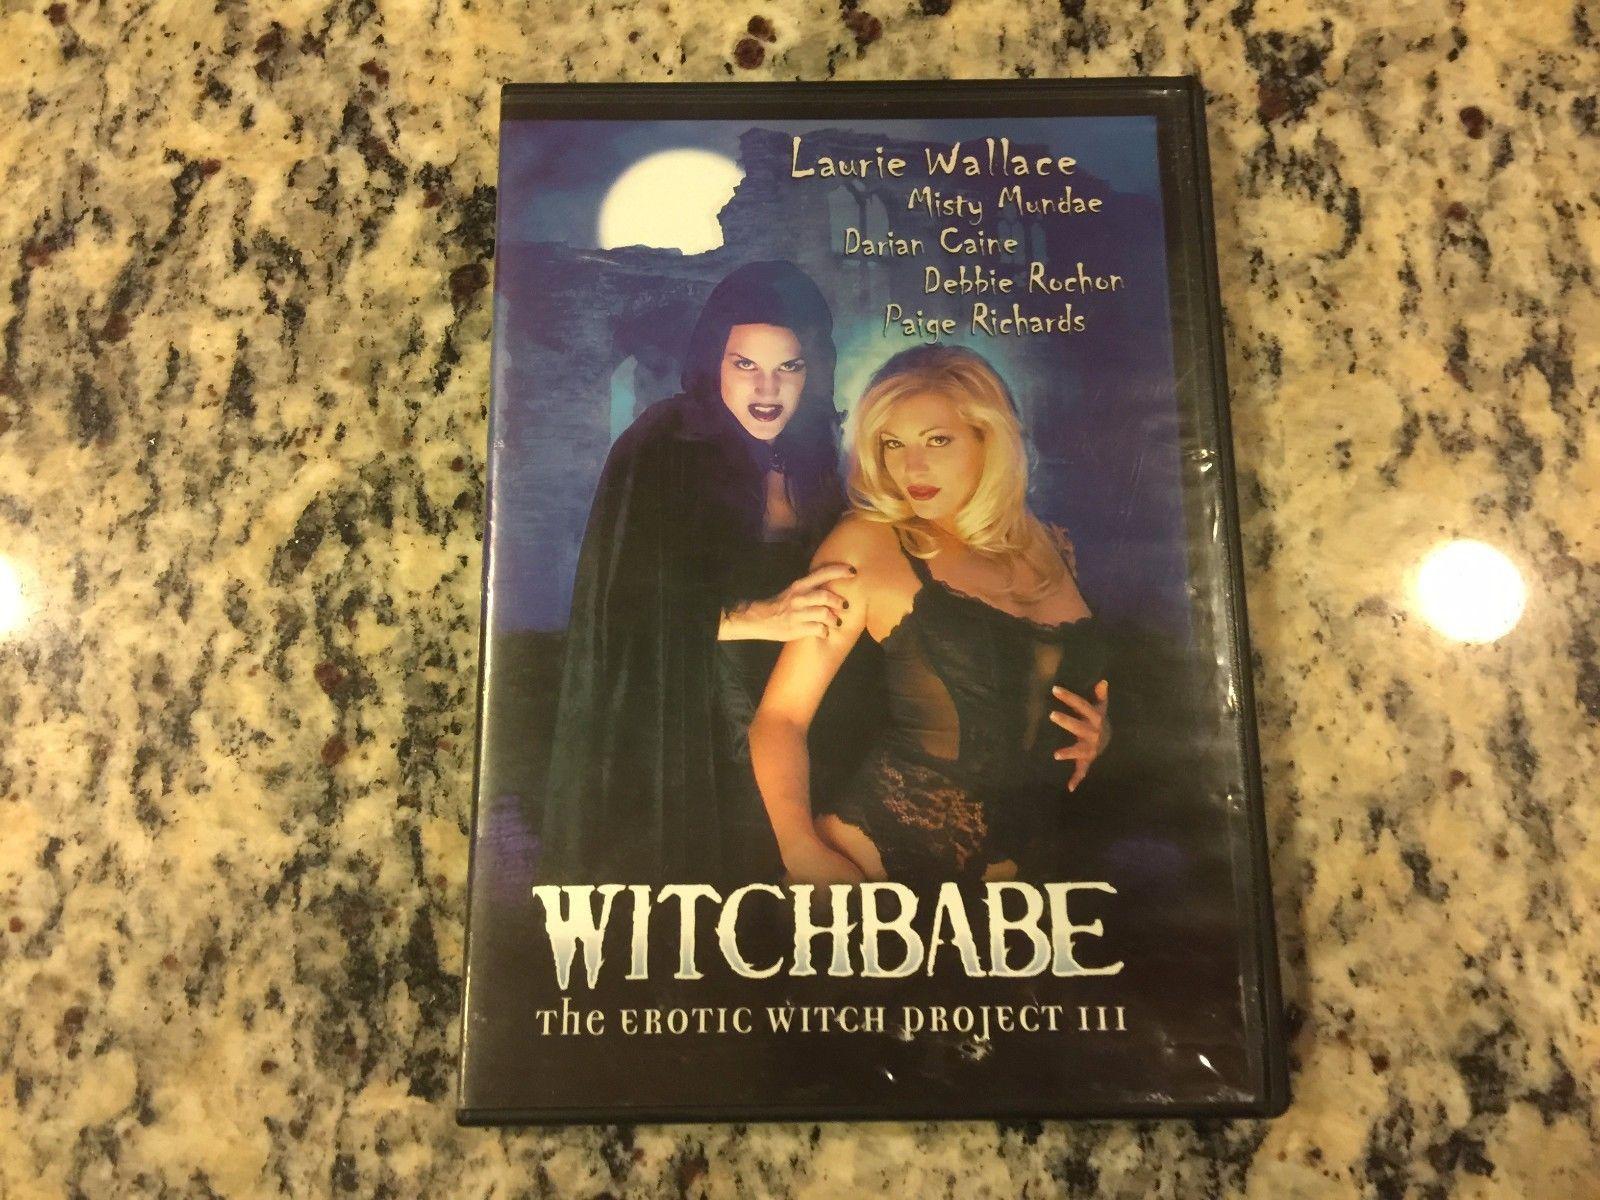 Viper reccomend Erotic witch project dvd